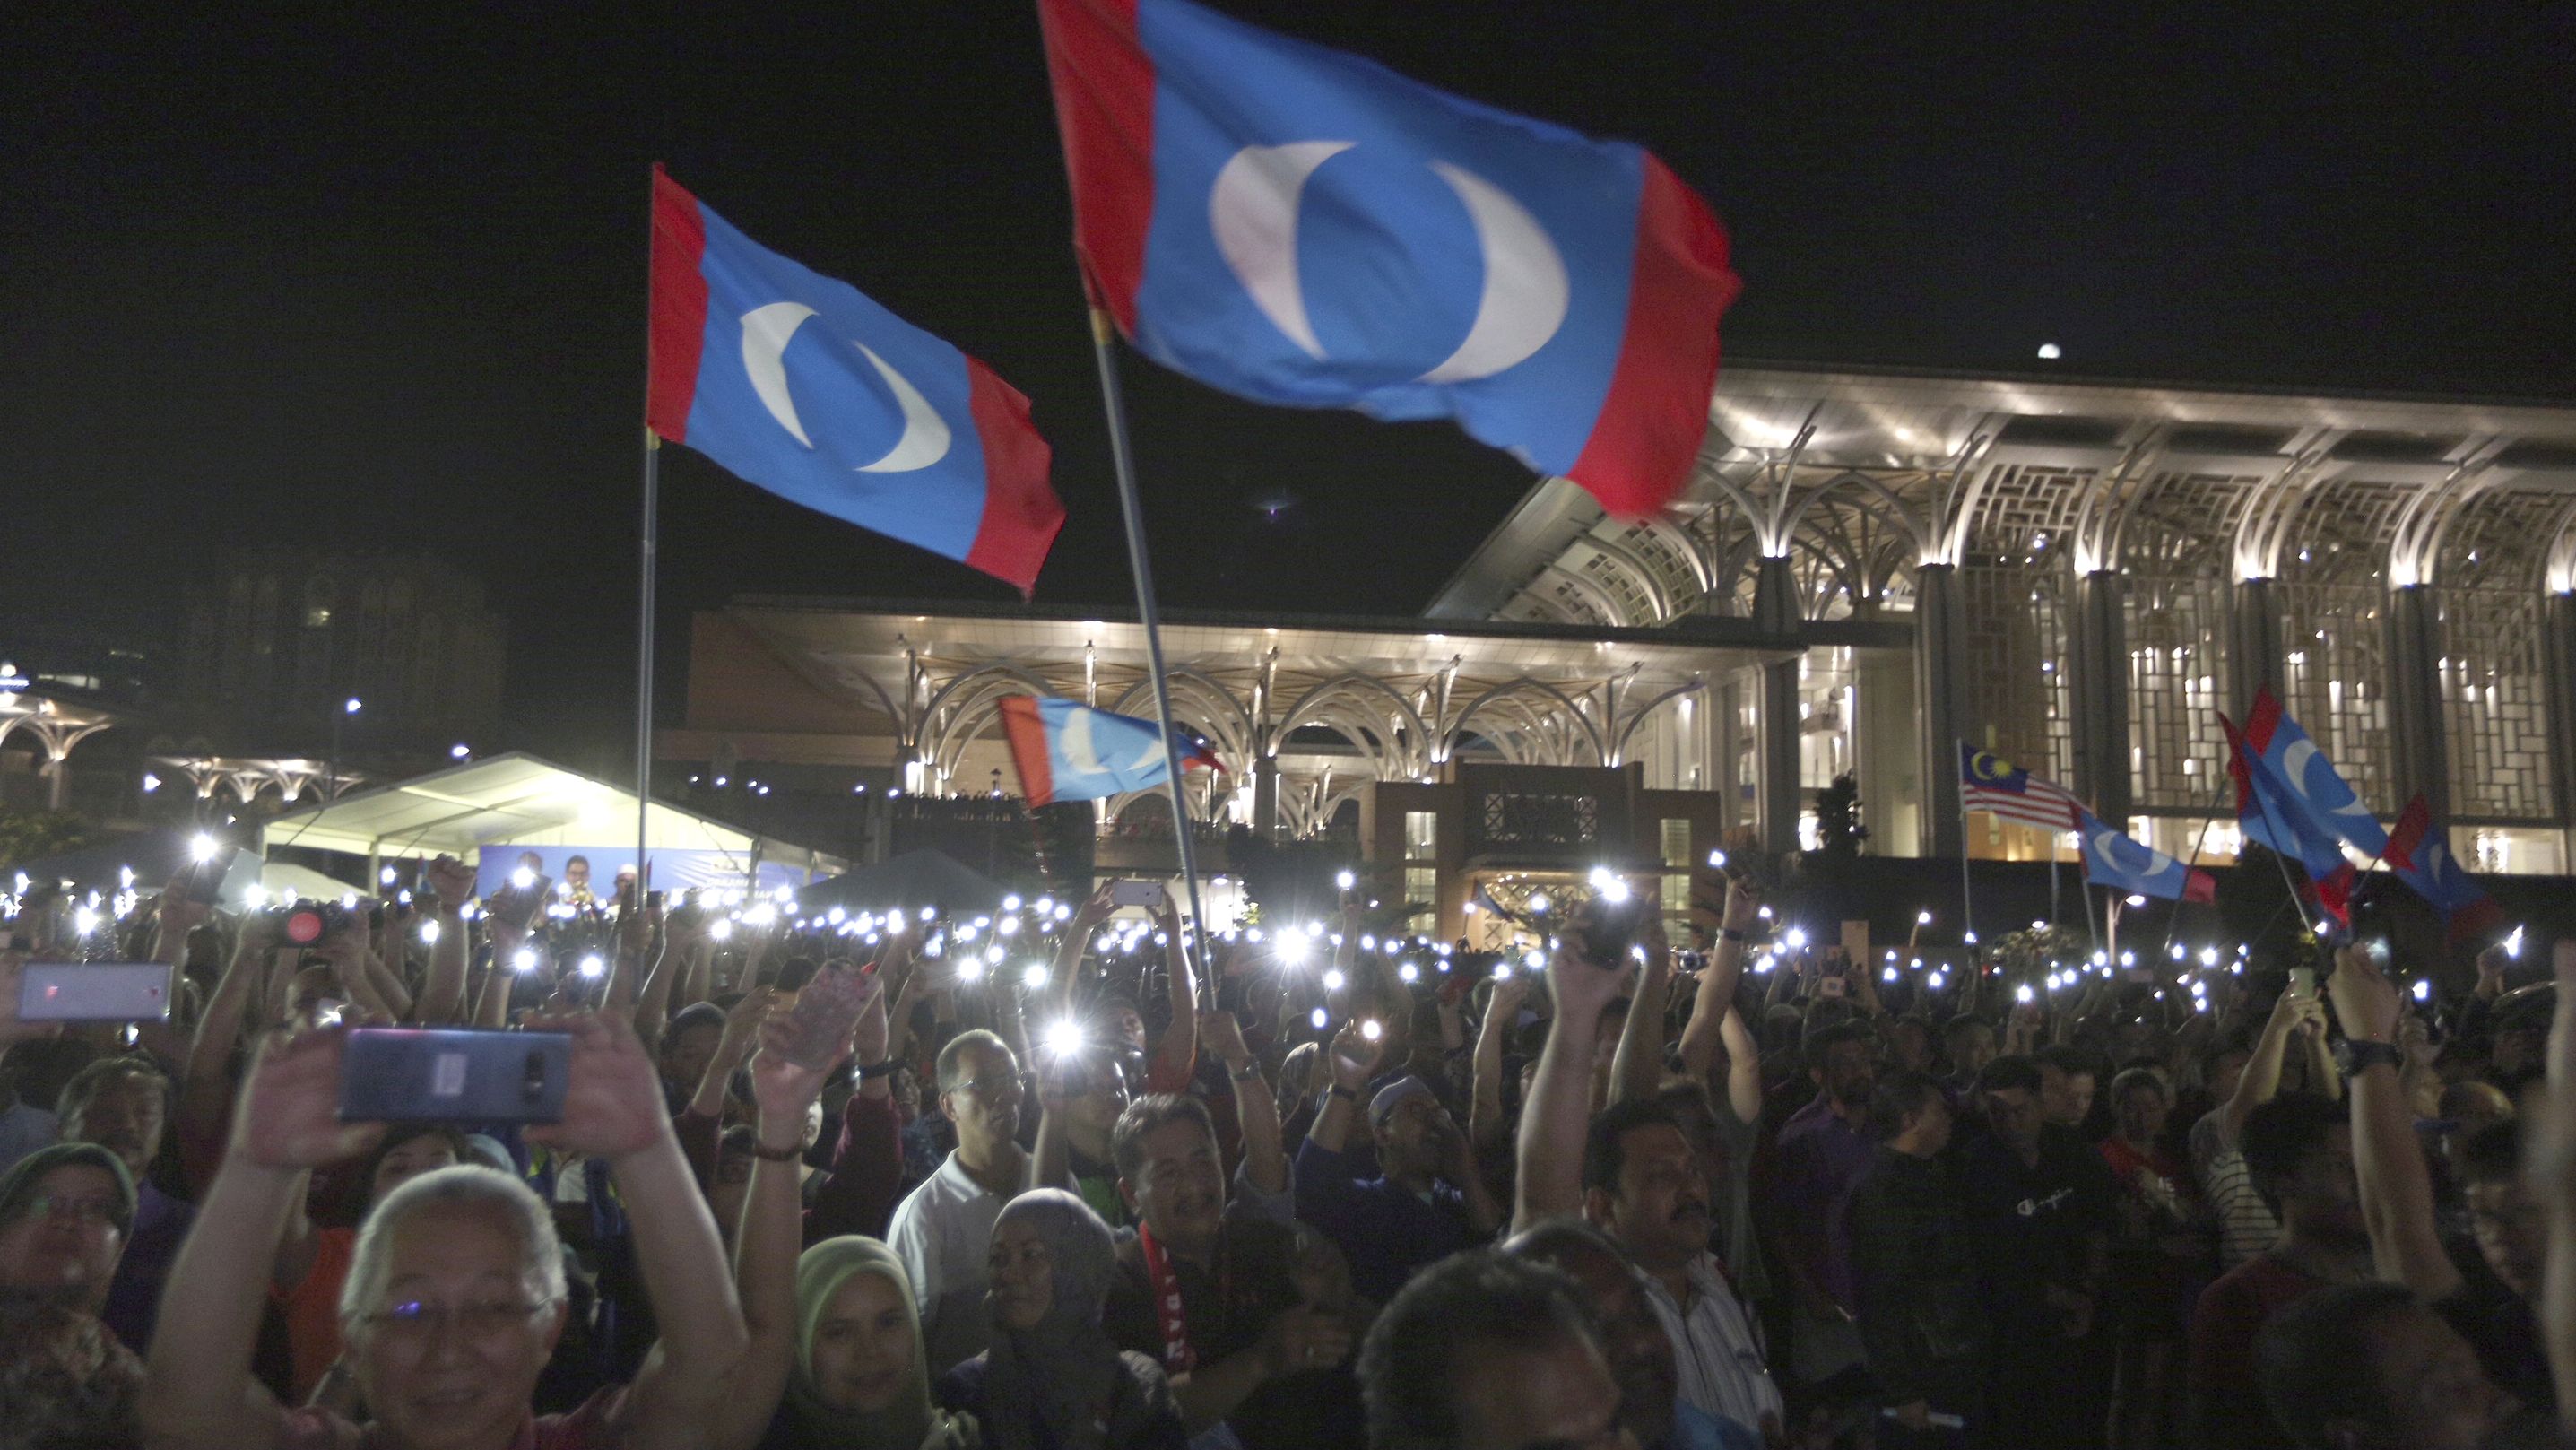 Supporters wave opposition party flags during an election campaign rally organized by Mahathir Mohamad, Putrajaya, Malaysia, May 3.